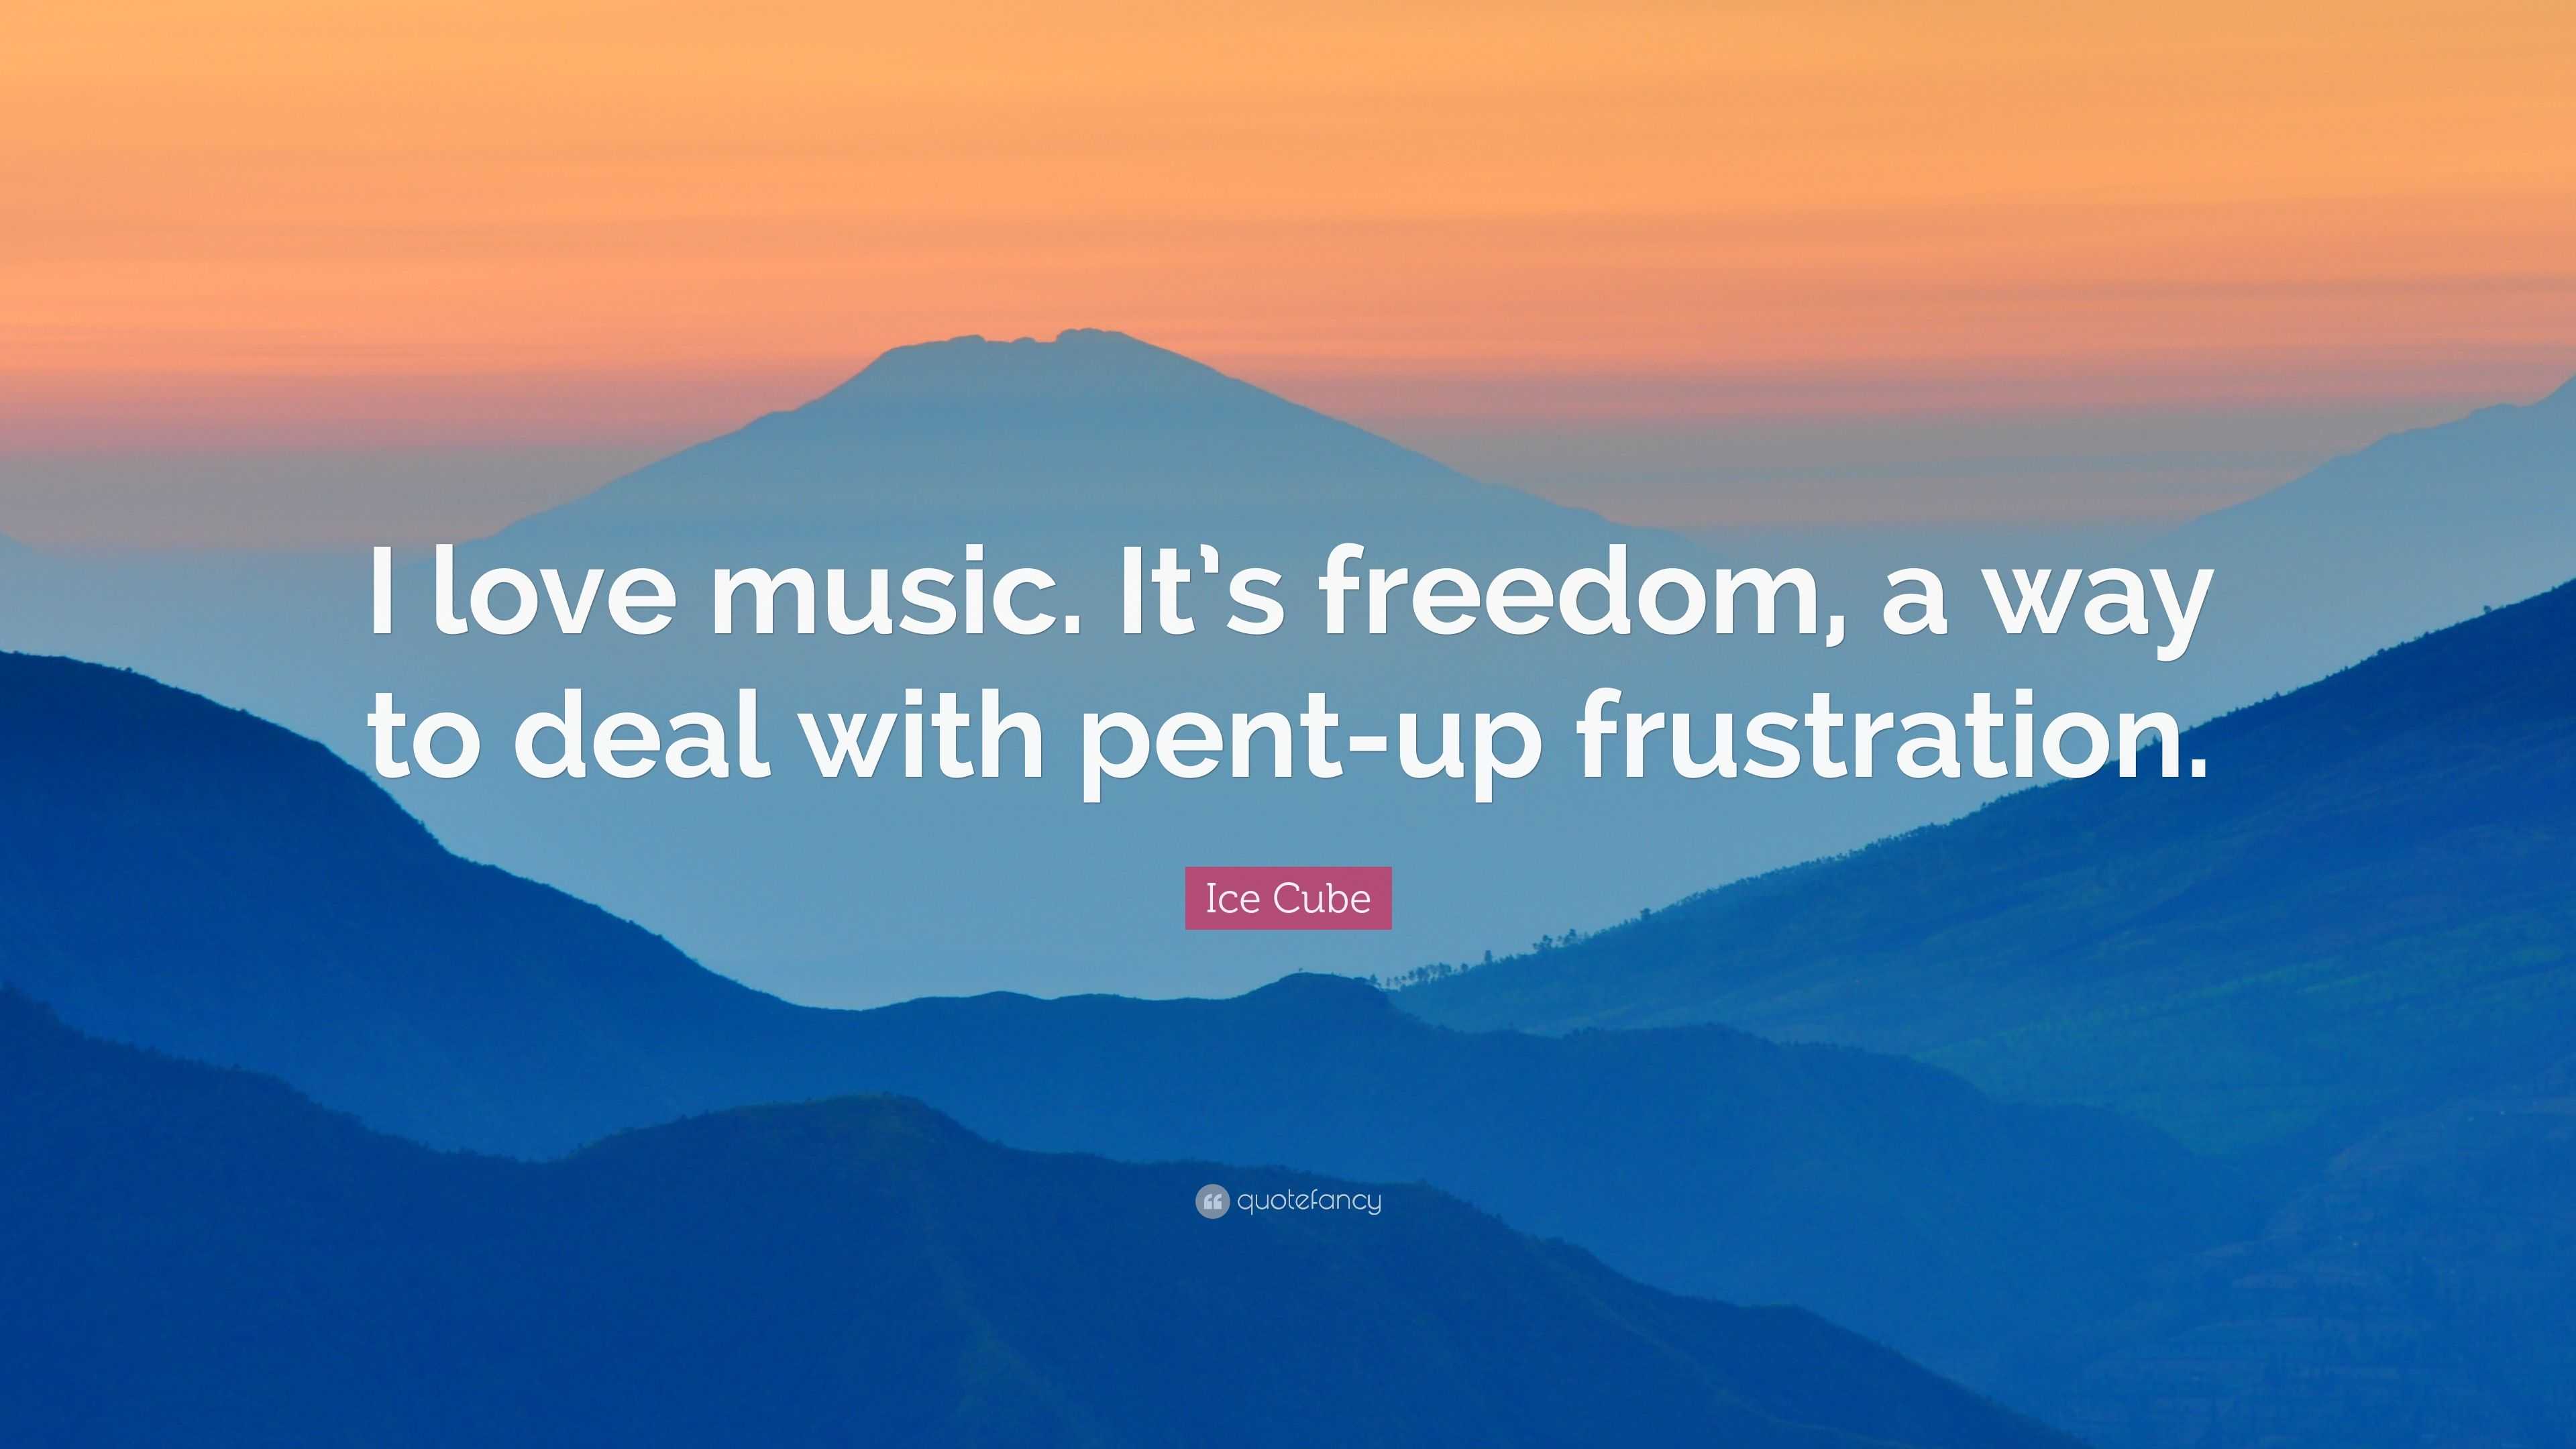 Ice Cube Quote: “I love music. It’s freedom, a way to deal with pent-up